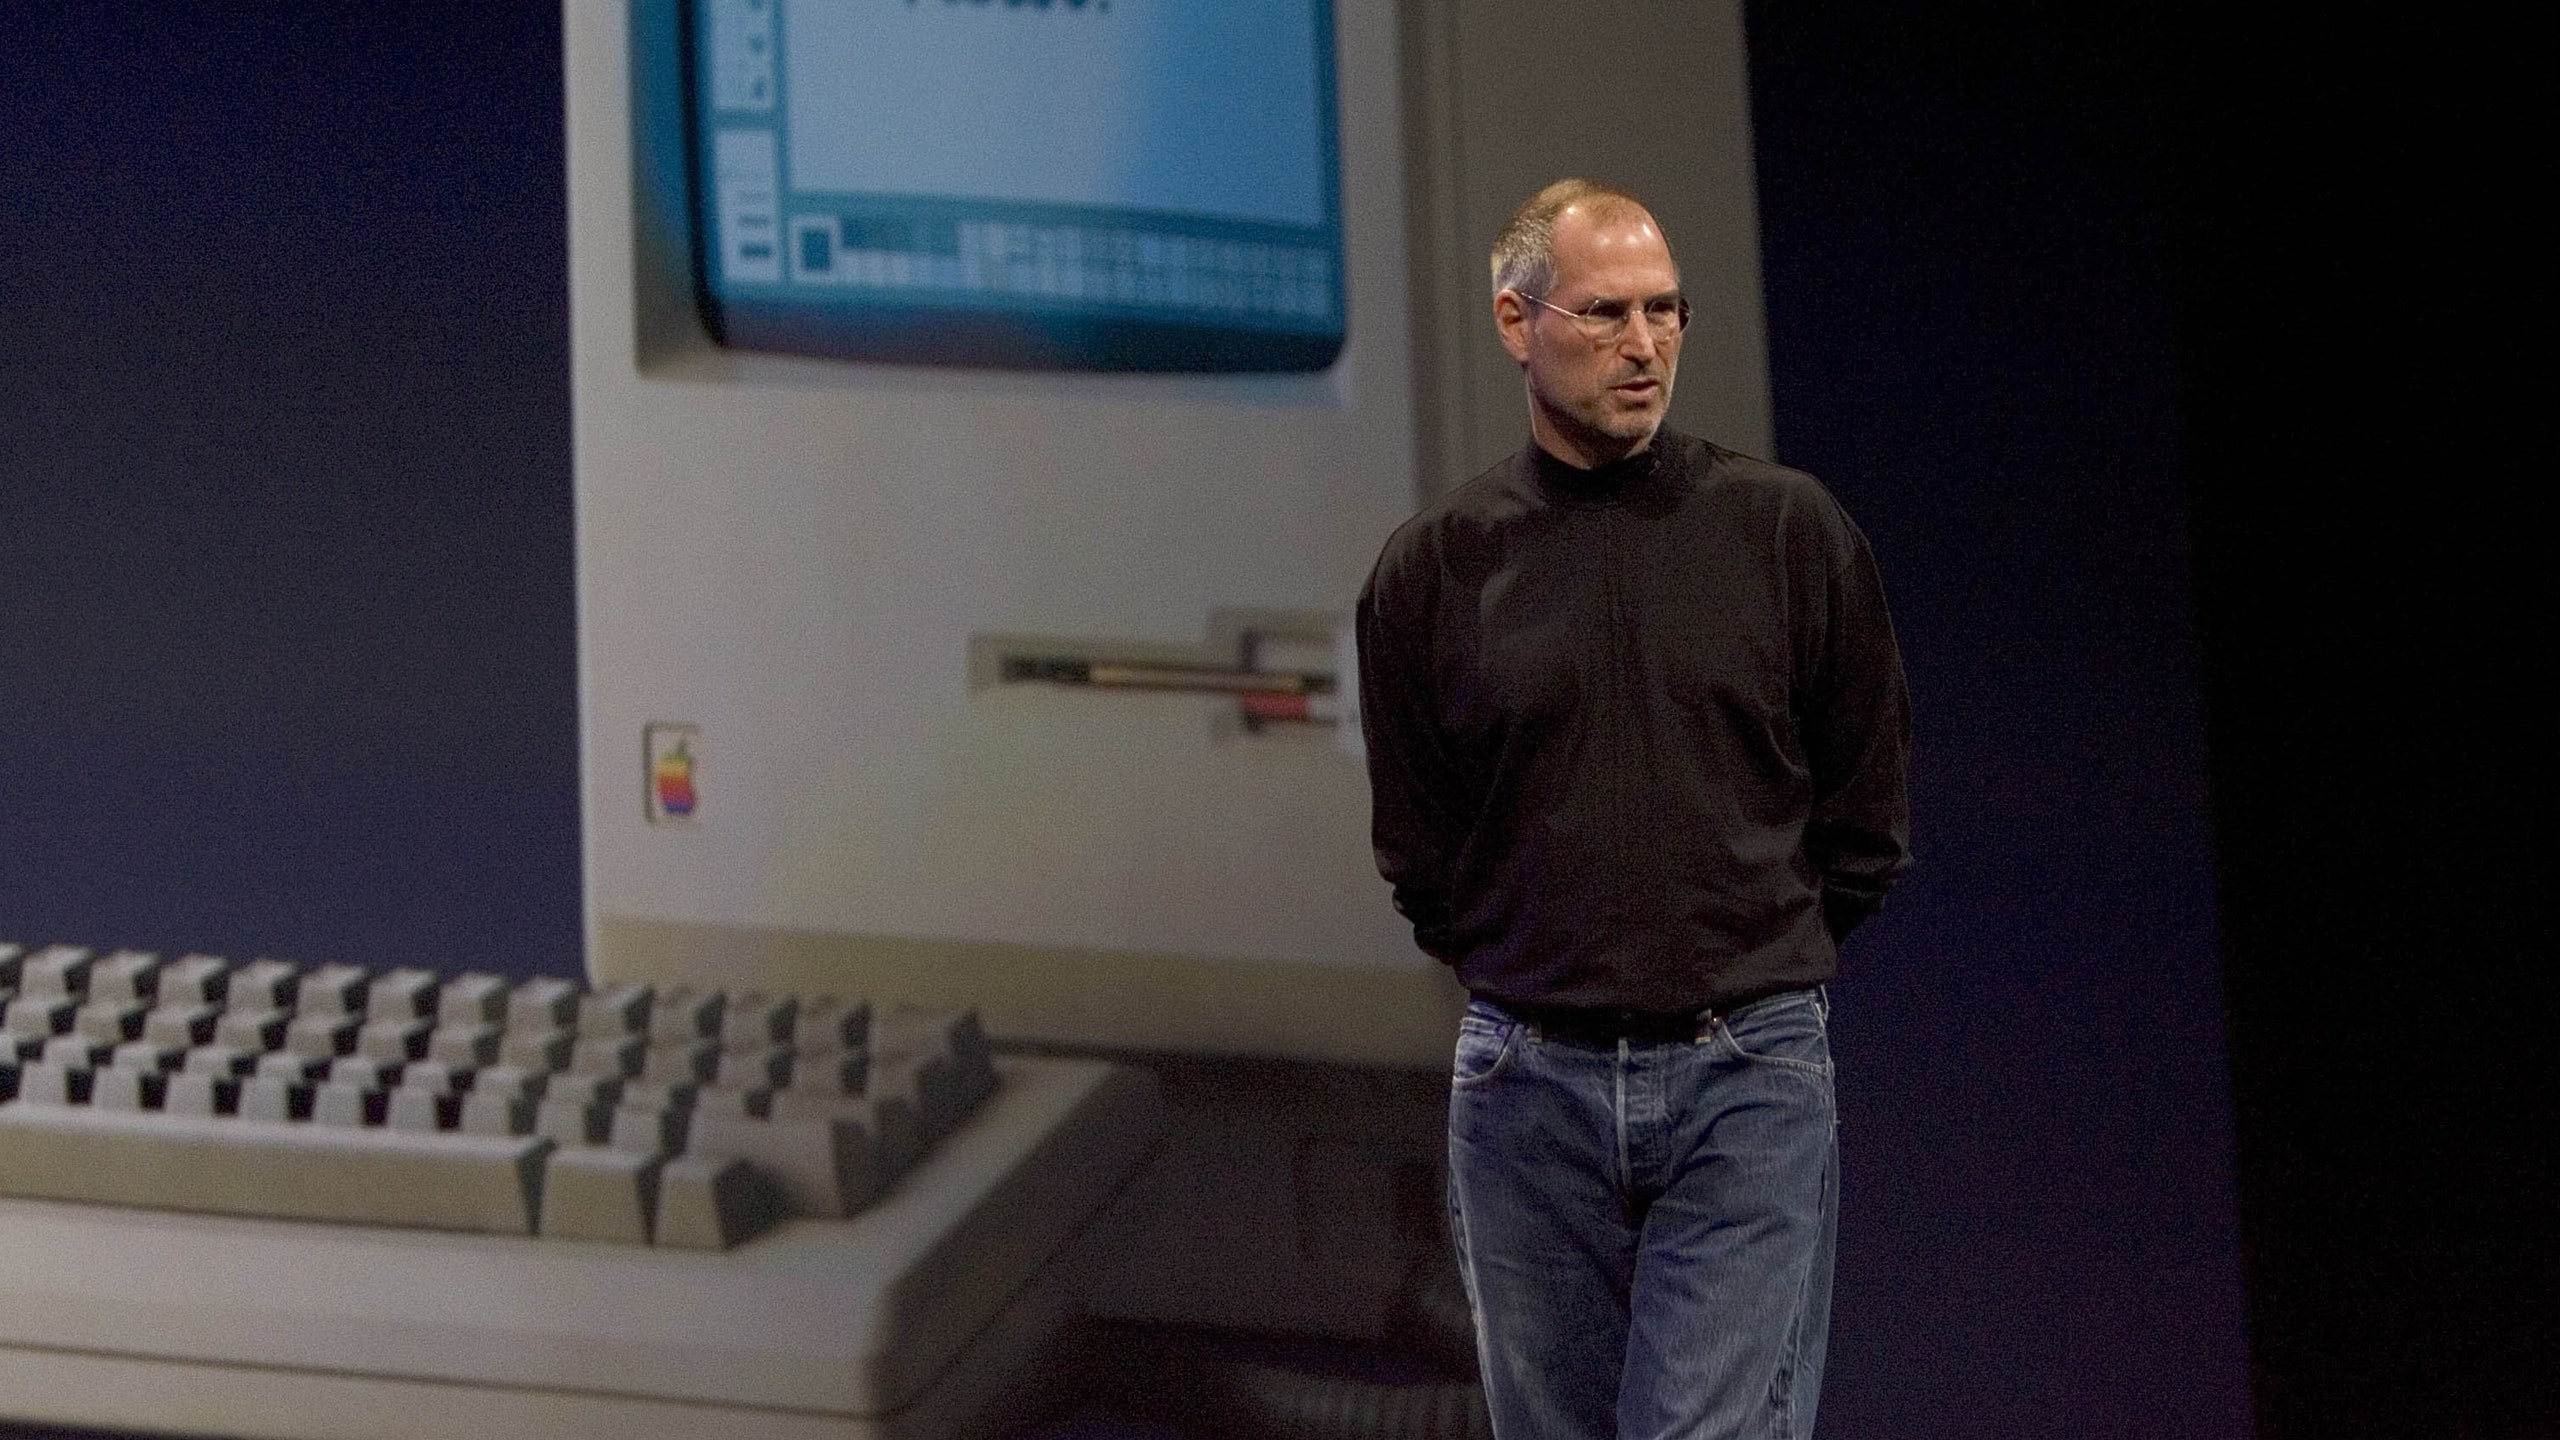 Biden will posthumously honor Steve Jobs for his contribution to progress

